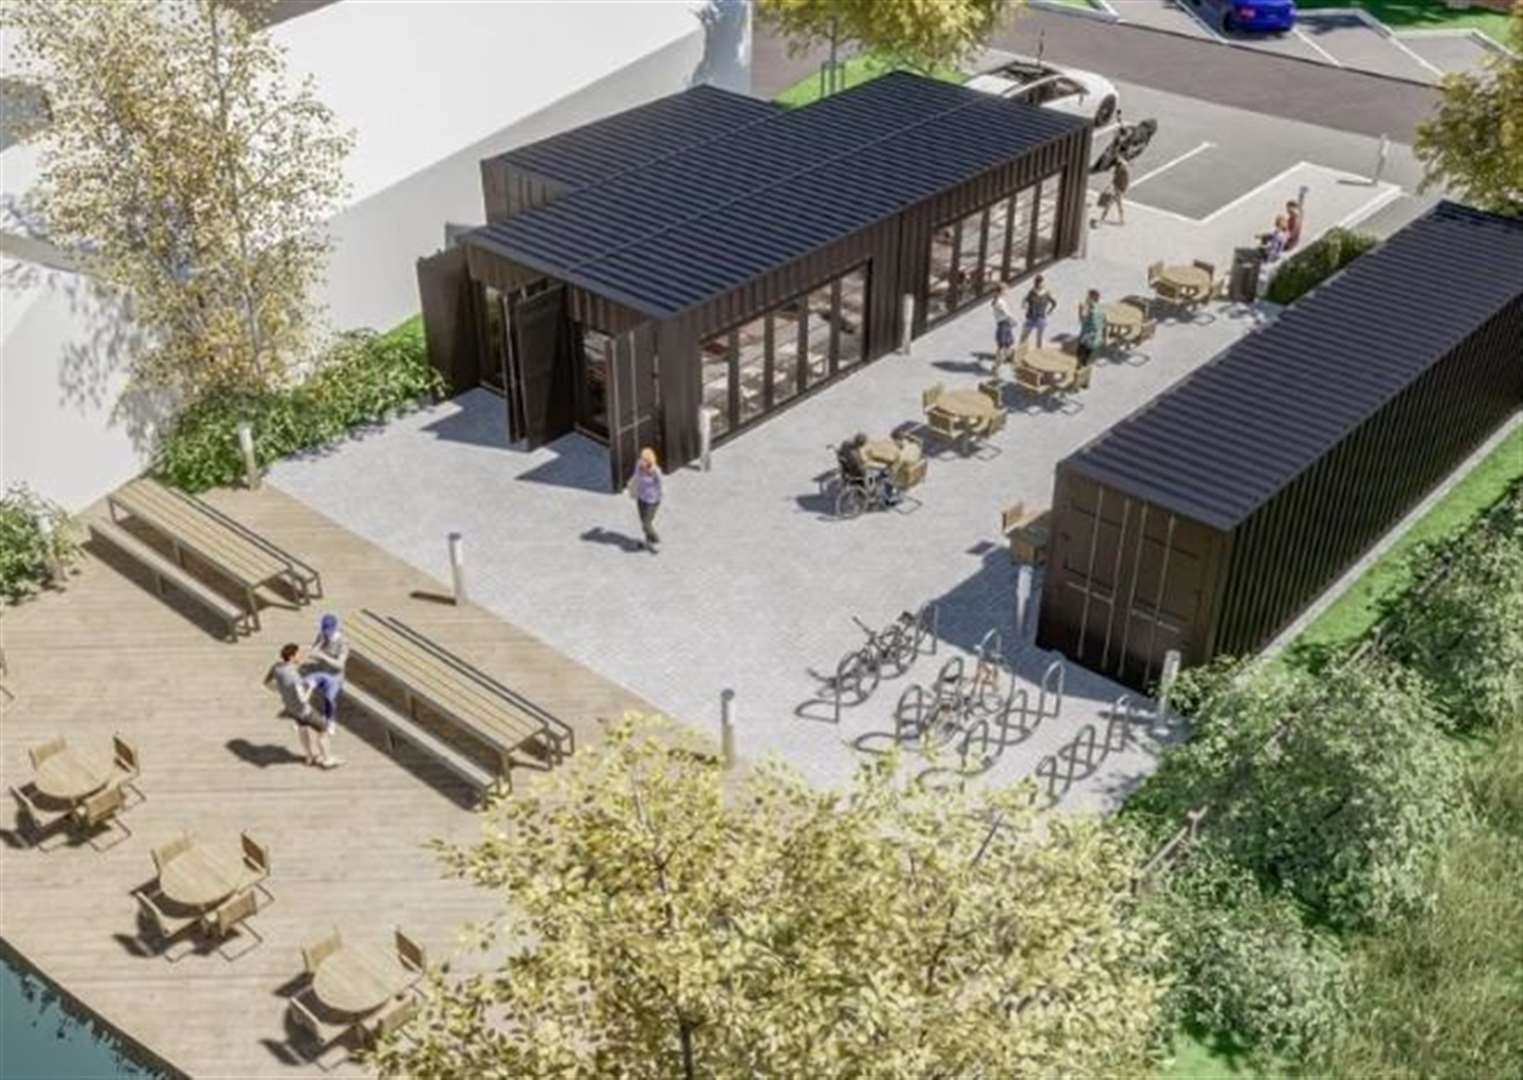 Cycling cafe set to open in summer as work starts